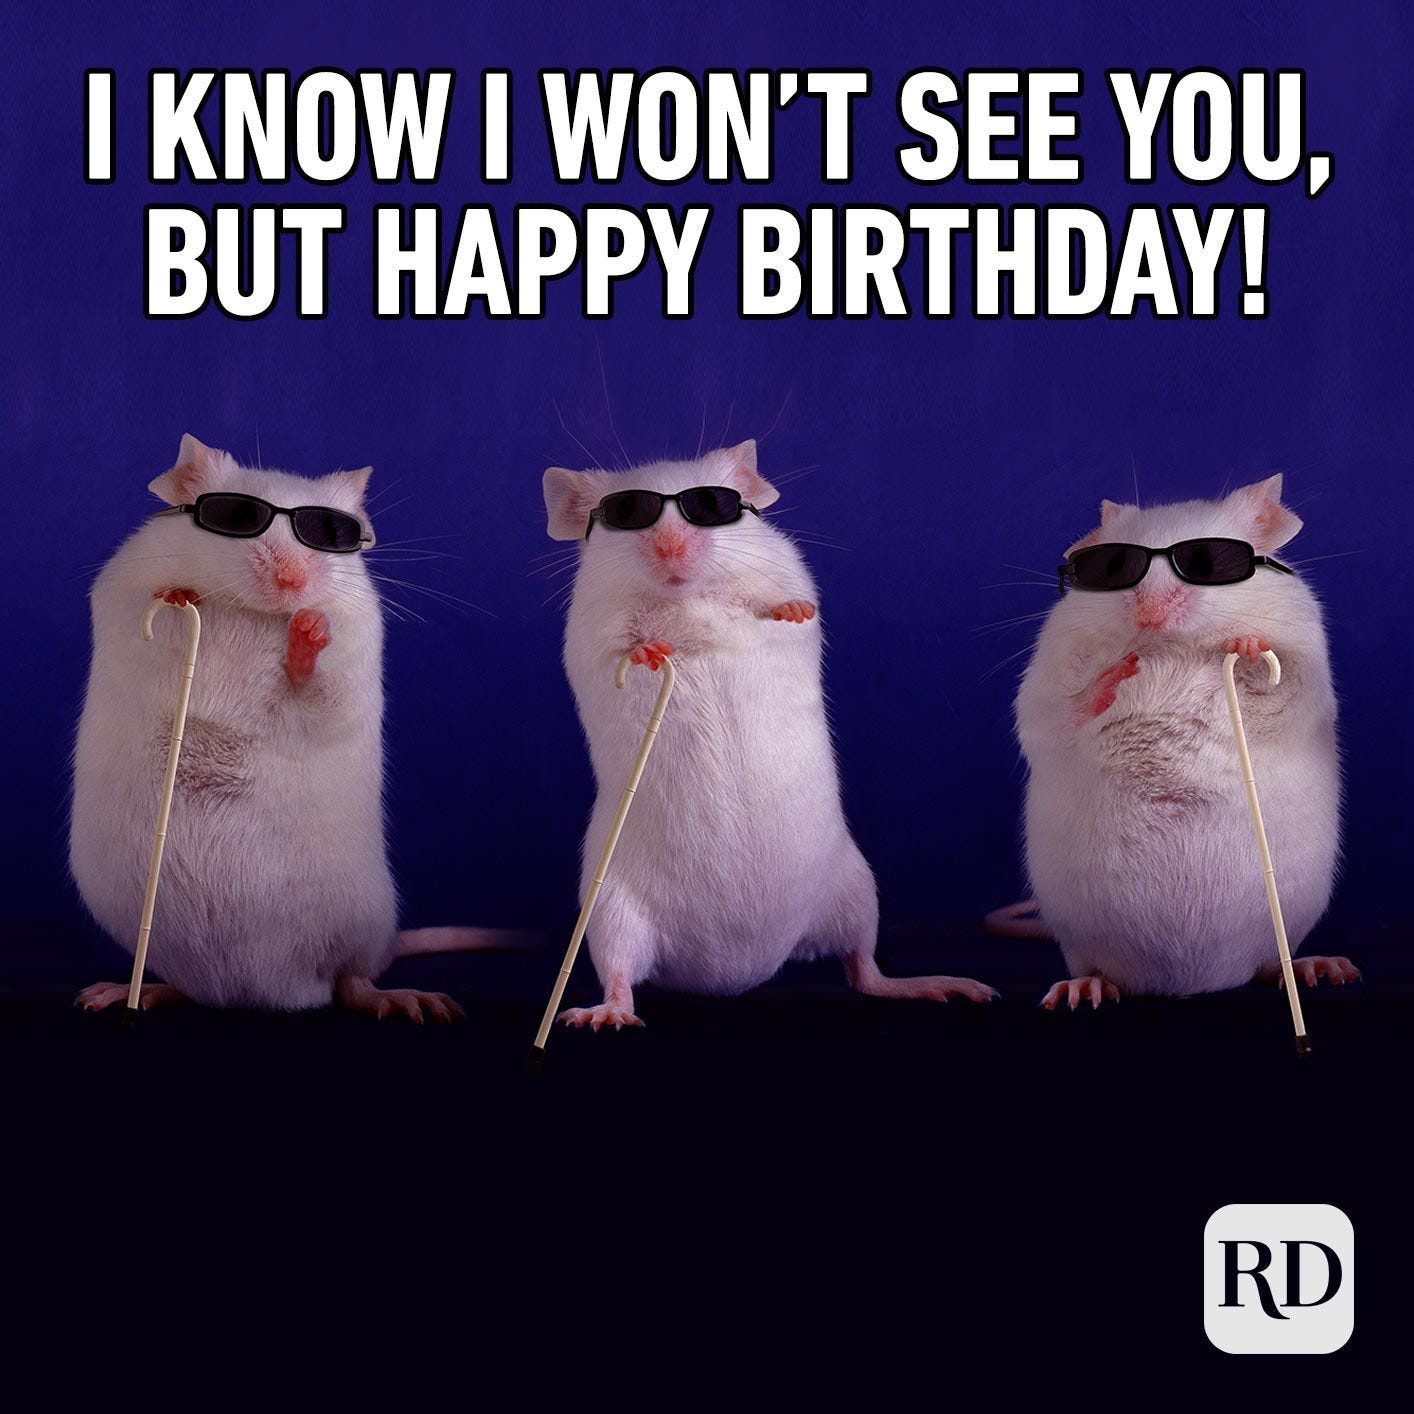 Photo of "the three blind mice" (real mice with sunglasses on) that reads "I know I won't see you, but happy birthday."